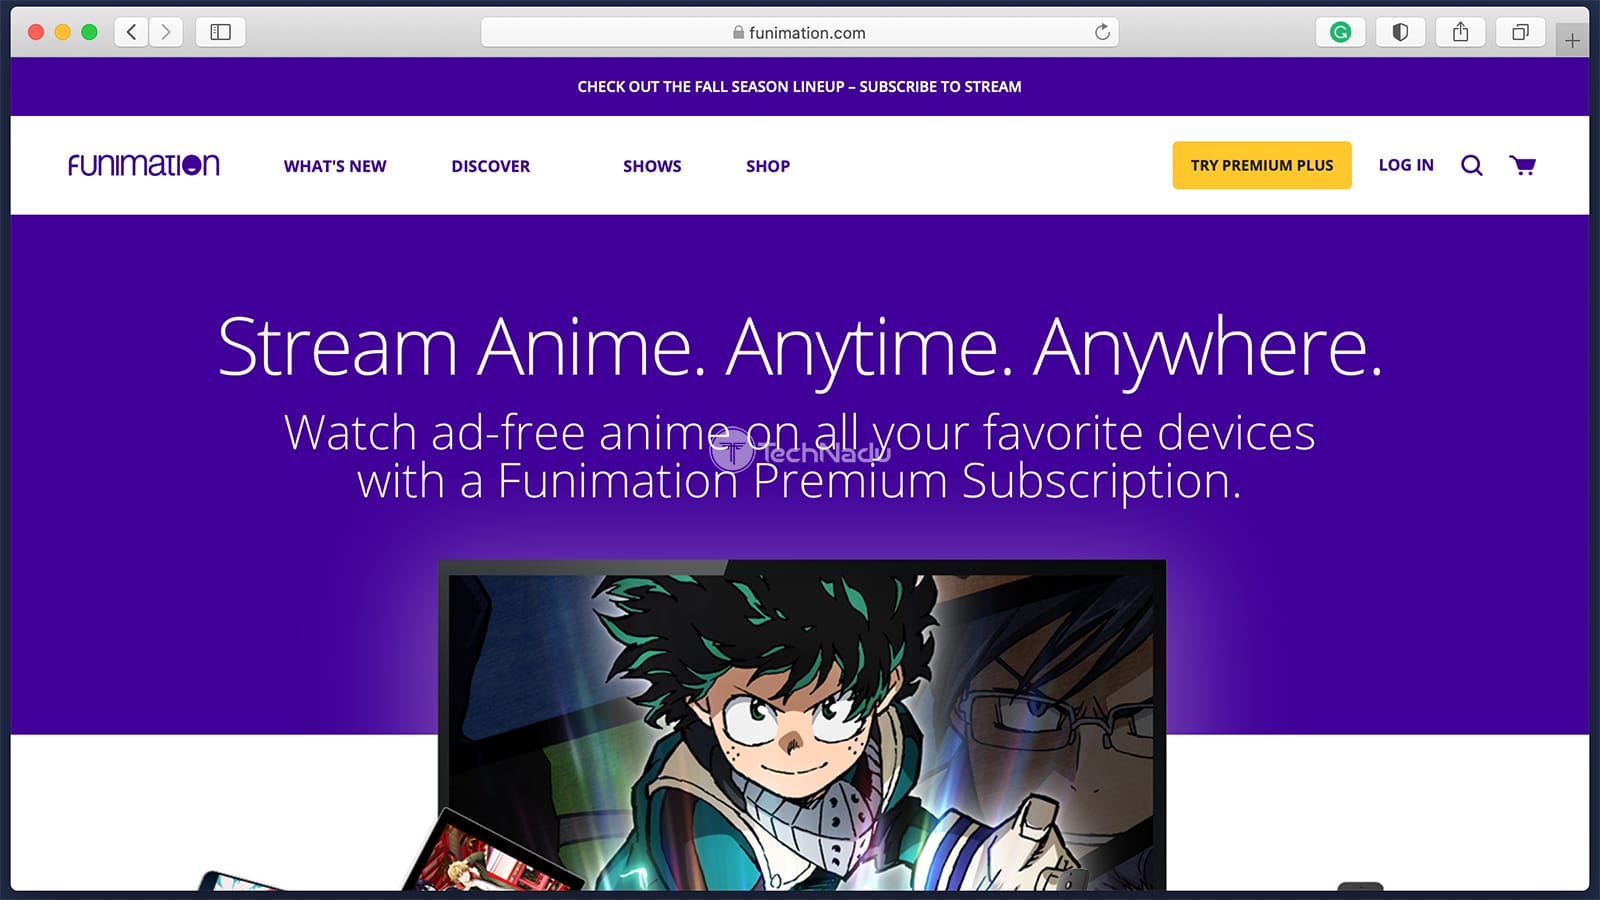 Home Page of Funimation Website